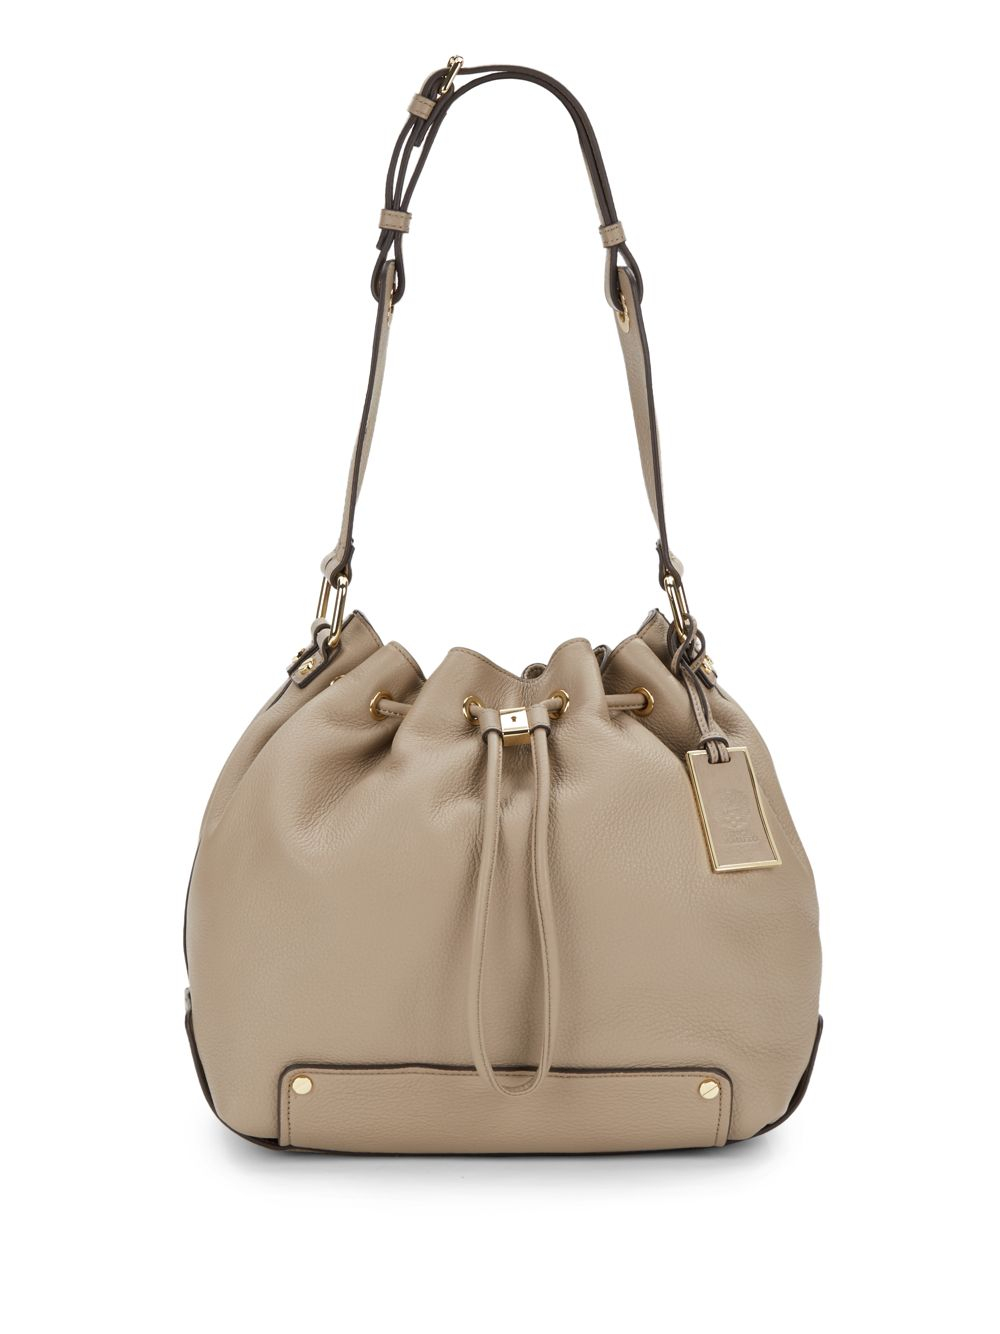 Lyst - Vince Camuto Drawstring Leather Bucket Bag in Brown